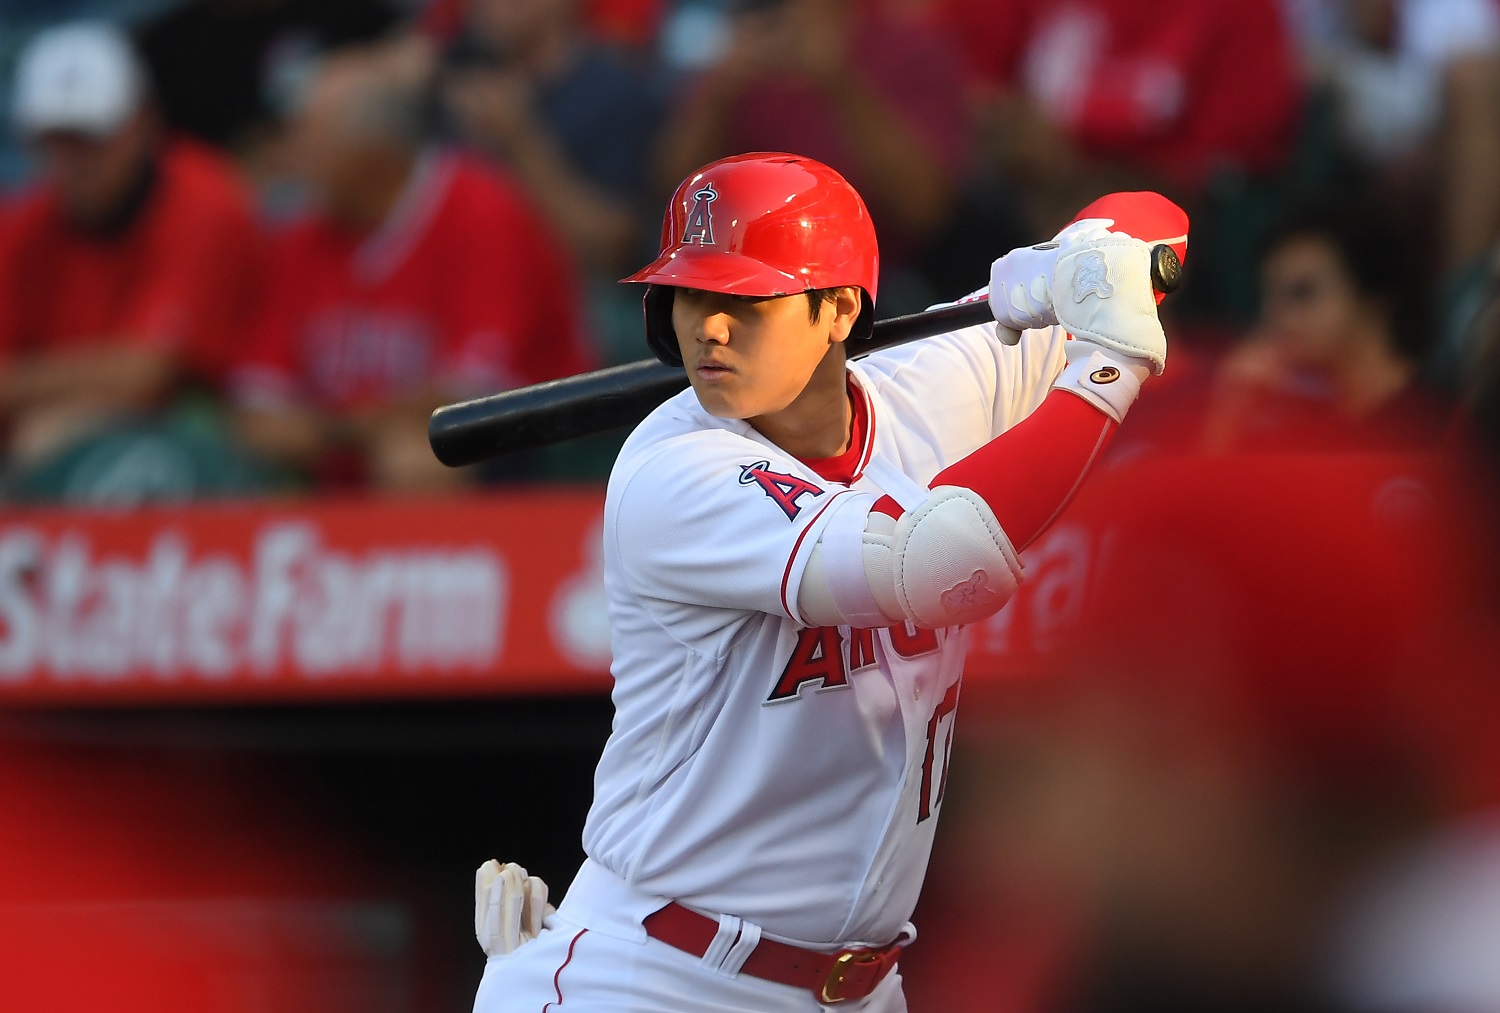 Shohei Ohtani Is on the Cusp of Home Run History